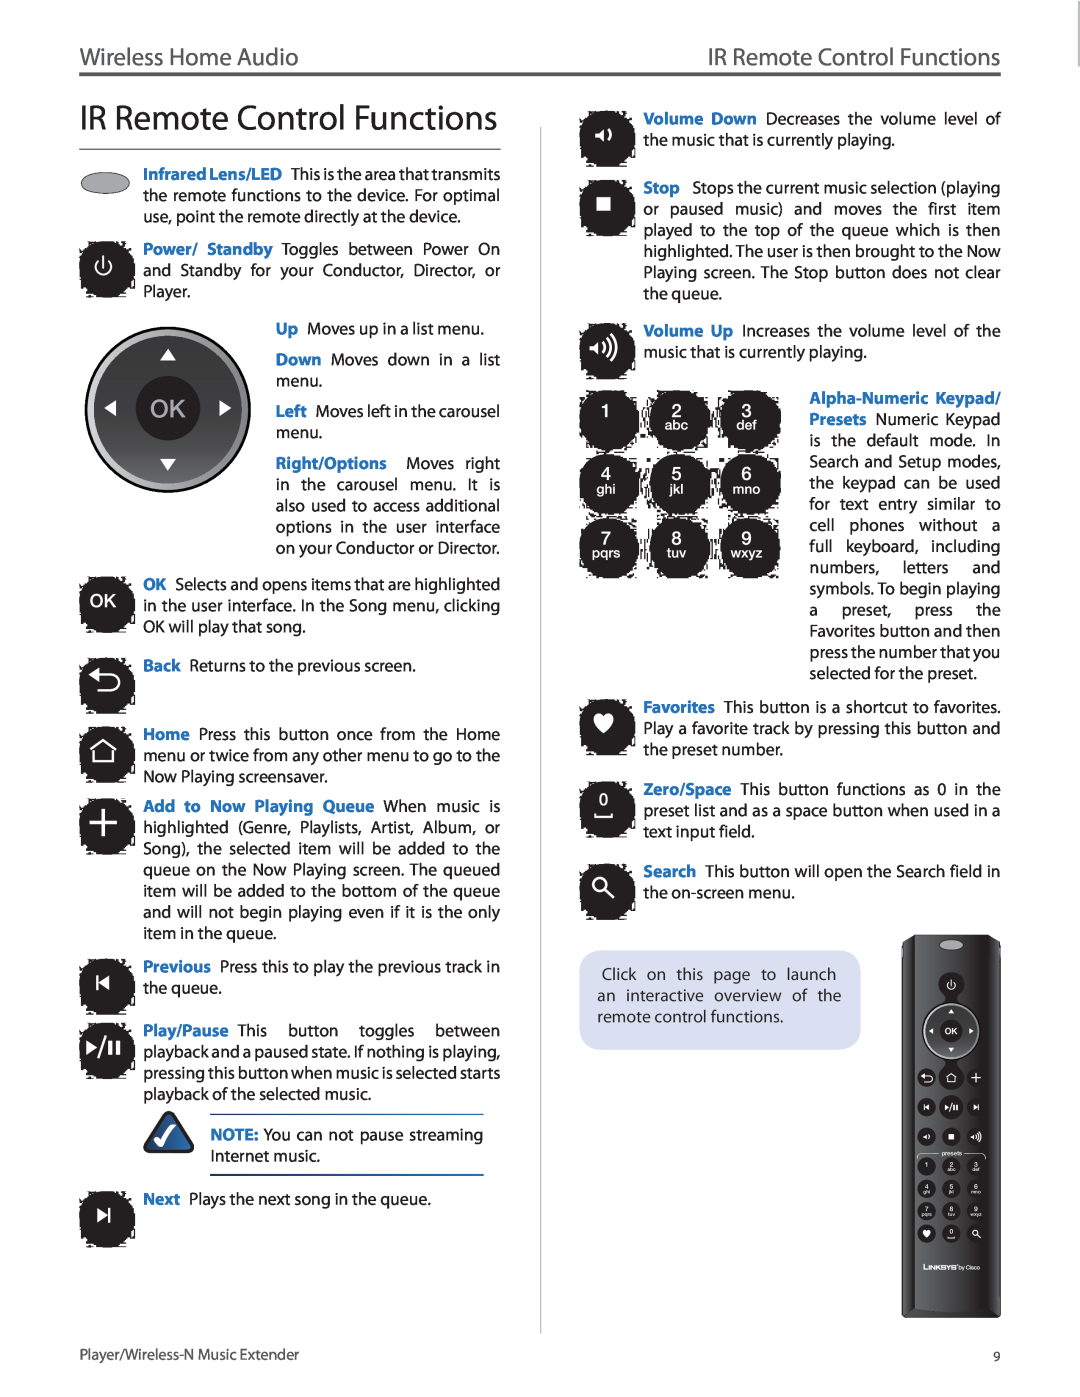 Linksys DMP100 manual IR Remote Control Functions, Wireless Home Audio 